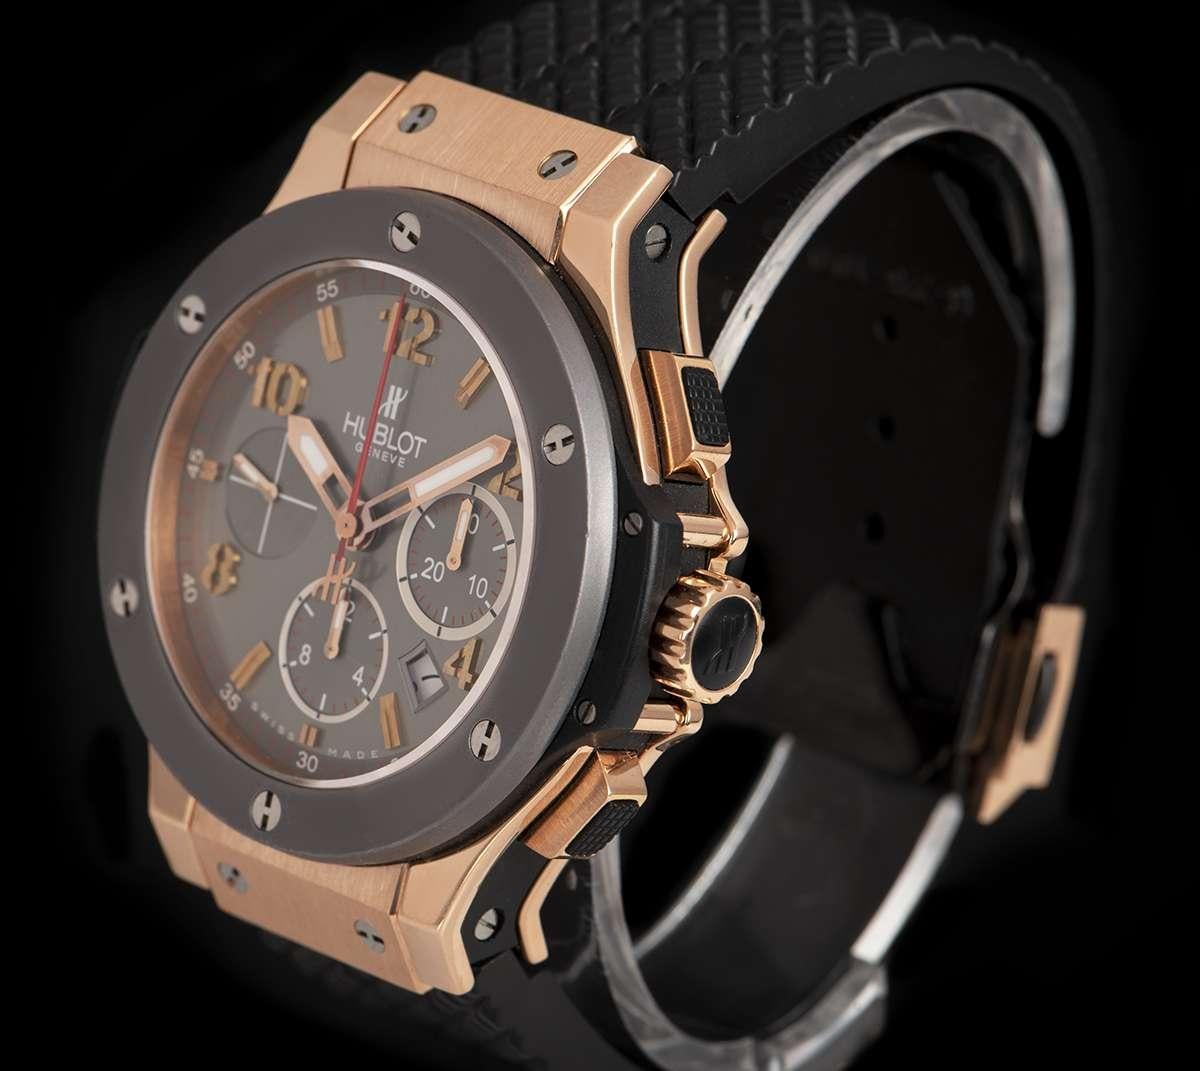 A Tantalum and 18k Rose Gold Big Bang Chronograph Limited Edition Gents Wristwatch, grey dial with applied arabic numbers at 2, 4, 8, 10 and 12 aswell as applied hour markers, 30 minute recorder at 3 0'clock, date between 4 & 5 0'clock, 12 hour